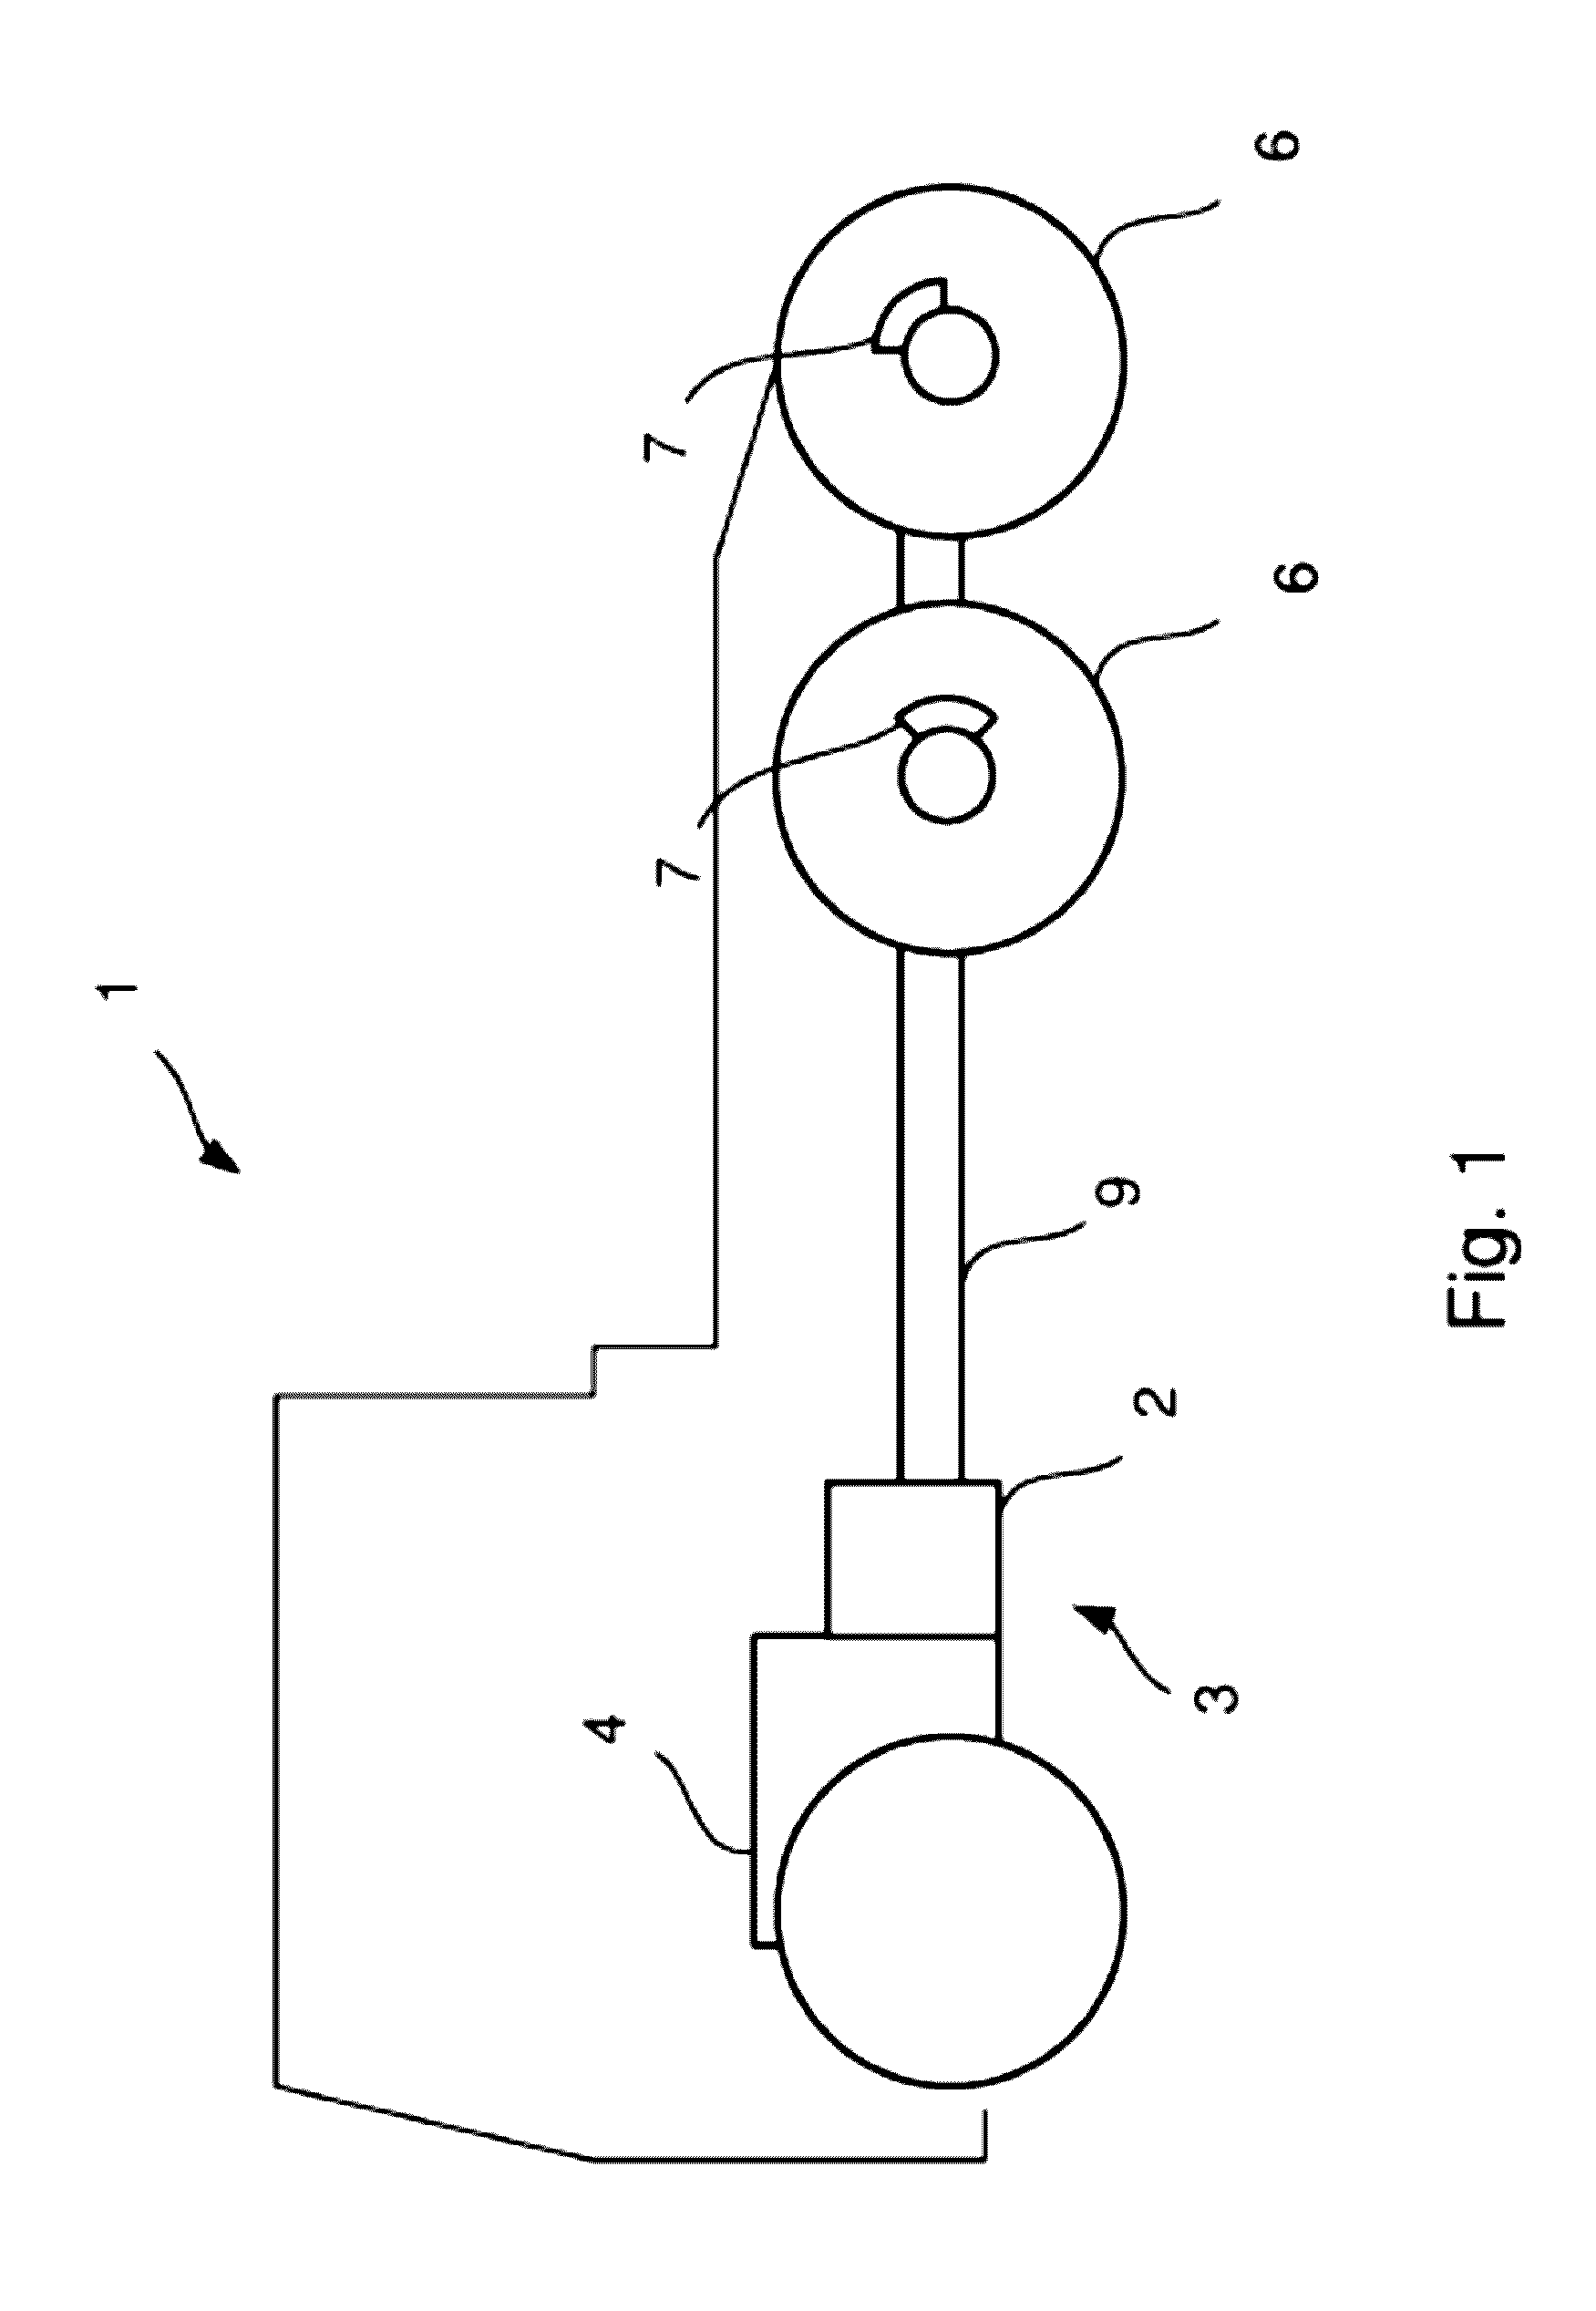 Method for controlling a hybrid driveline